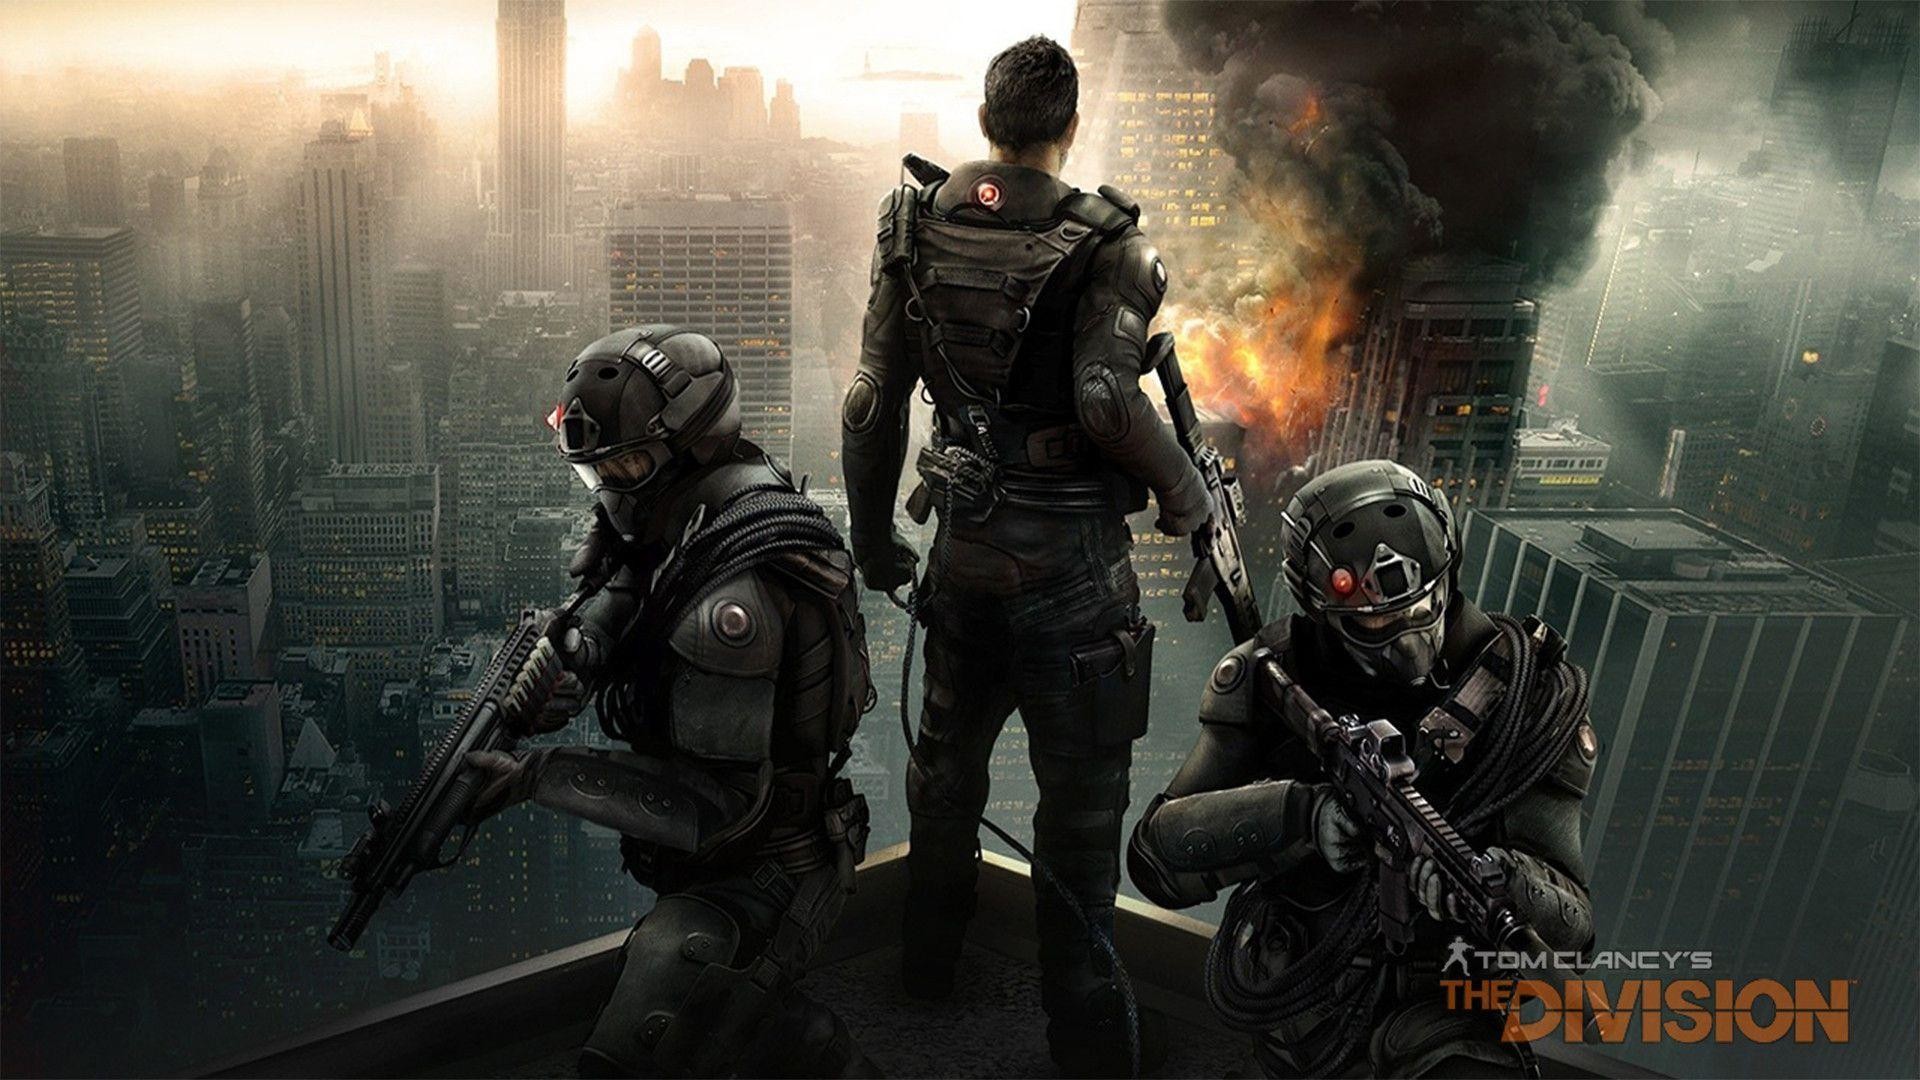 1920x1080 2015 Third Person Shooter Game The Division Wallpaper - 21 .